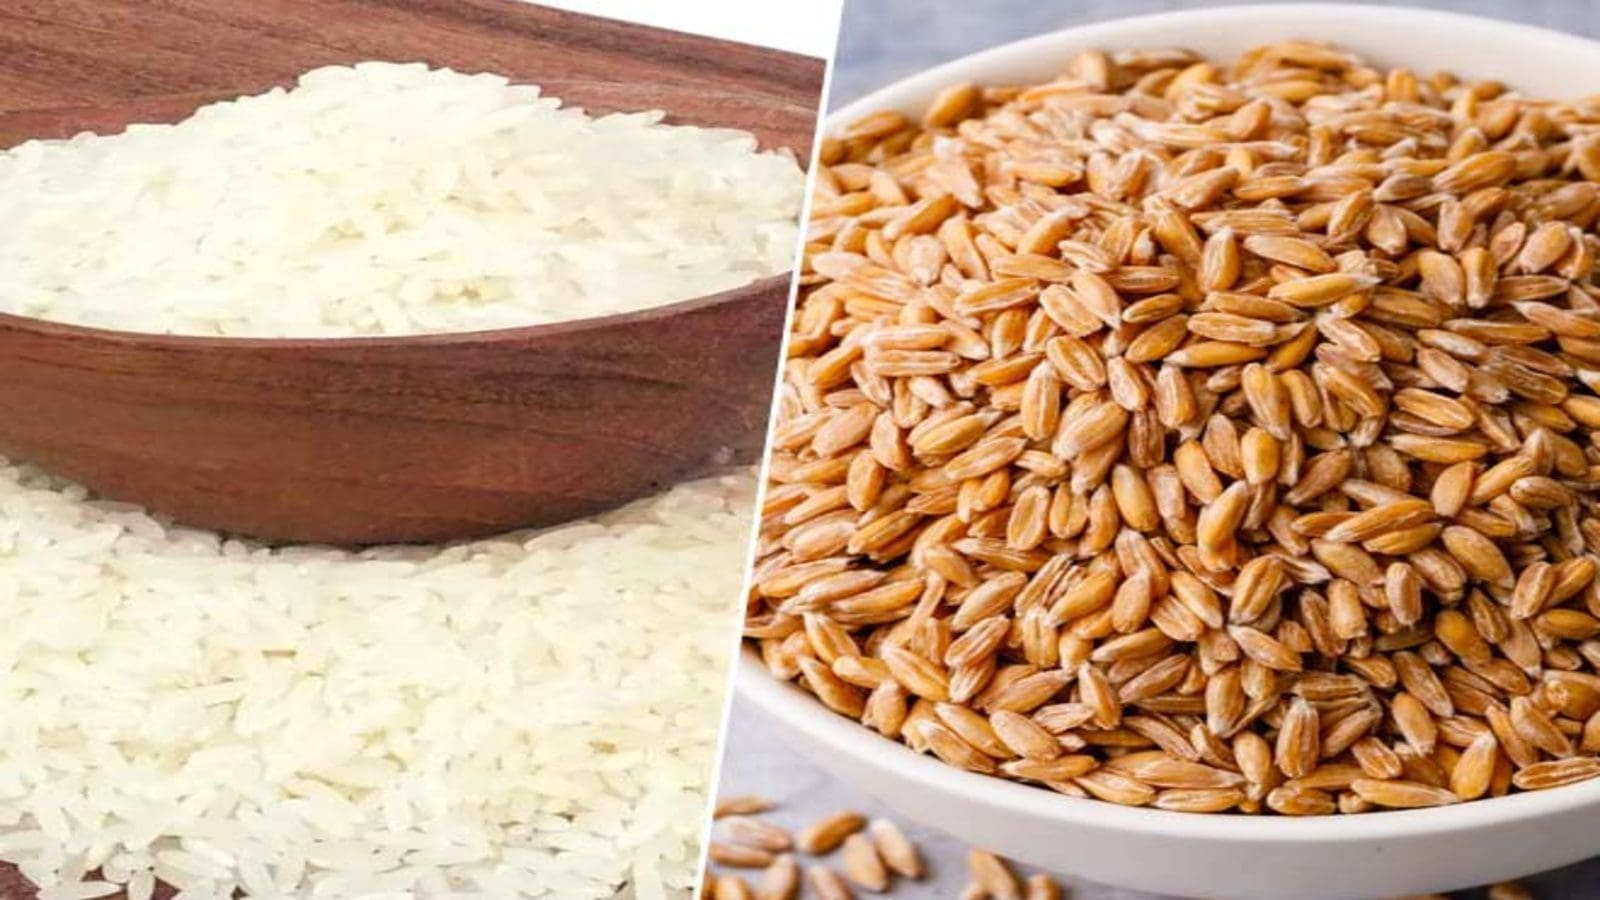 Angola food import bill jumps to US$2.8B driven by rice, wheat, and palm oil imports